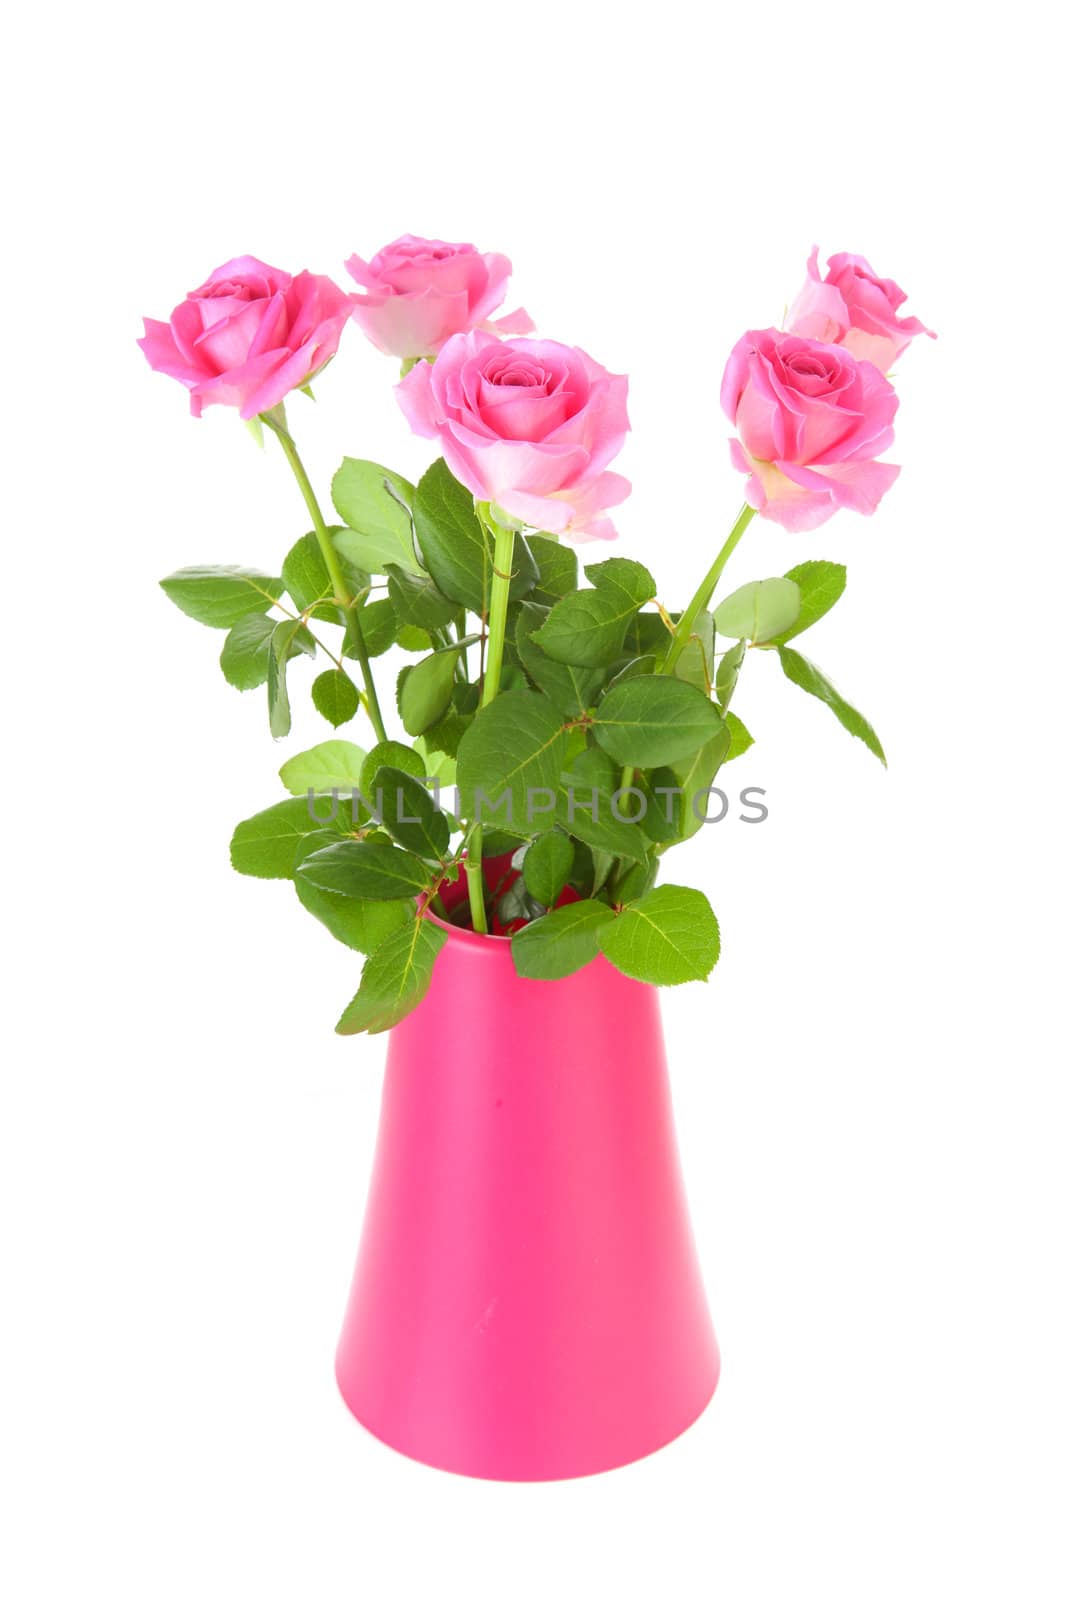 Bouquet of pink roses in vase by sannie32